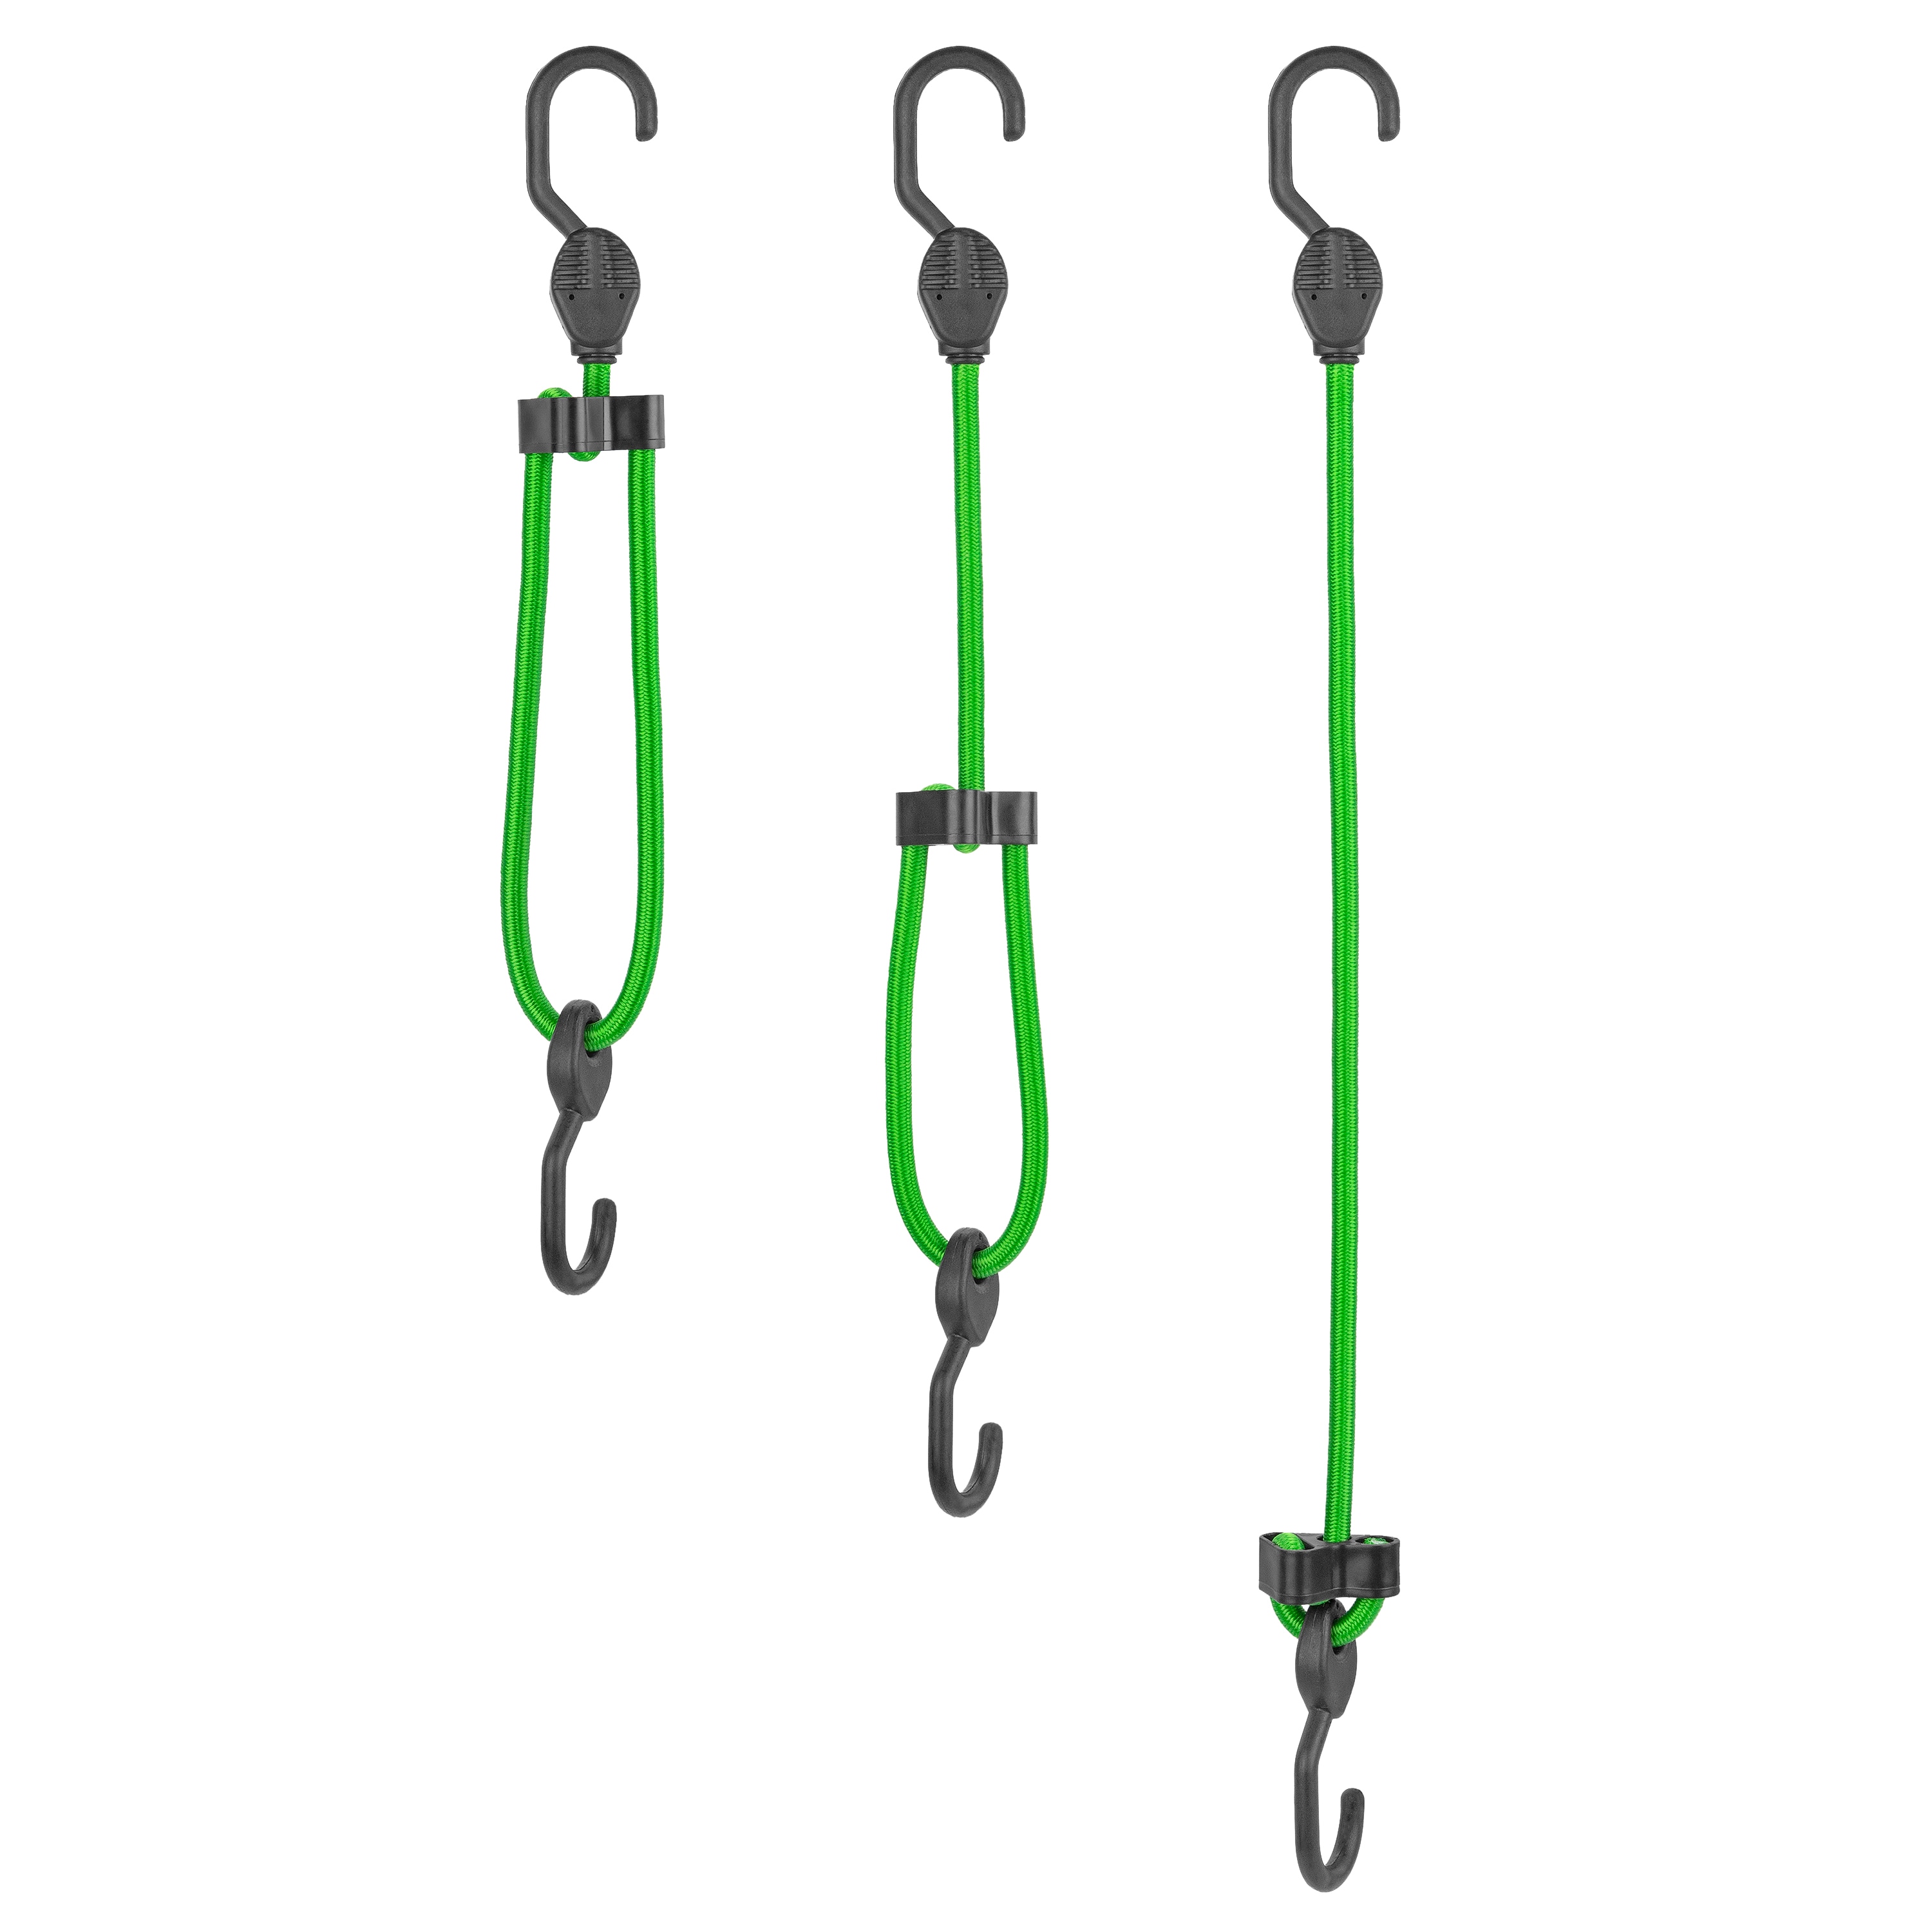 (3/8) ADJUSTABLE SIQCN USA MADE BUNGEE CORDS